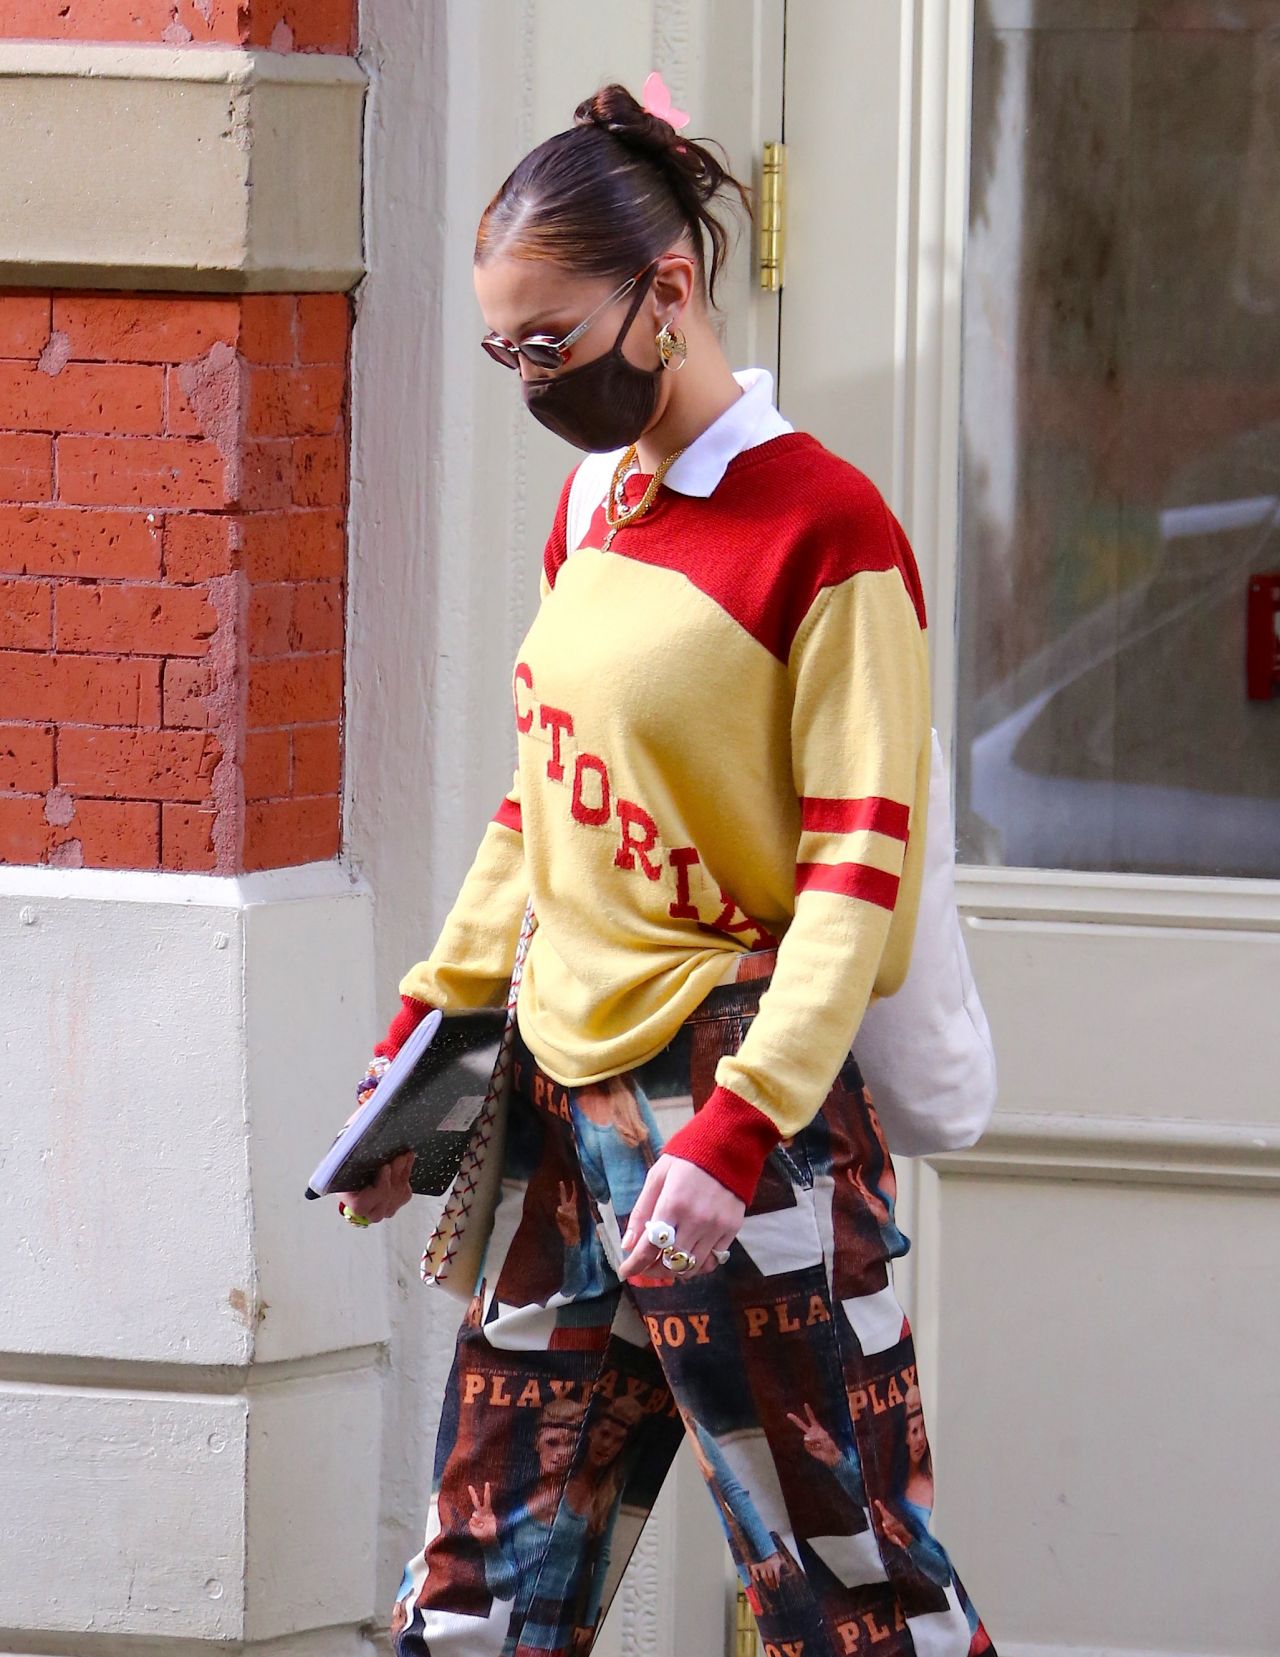 Bella Hadid Wears Sold-Out Telfar Bag and Playboy Pants in NYC